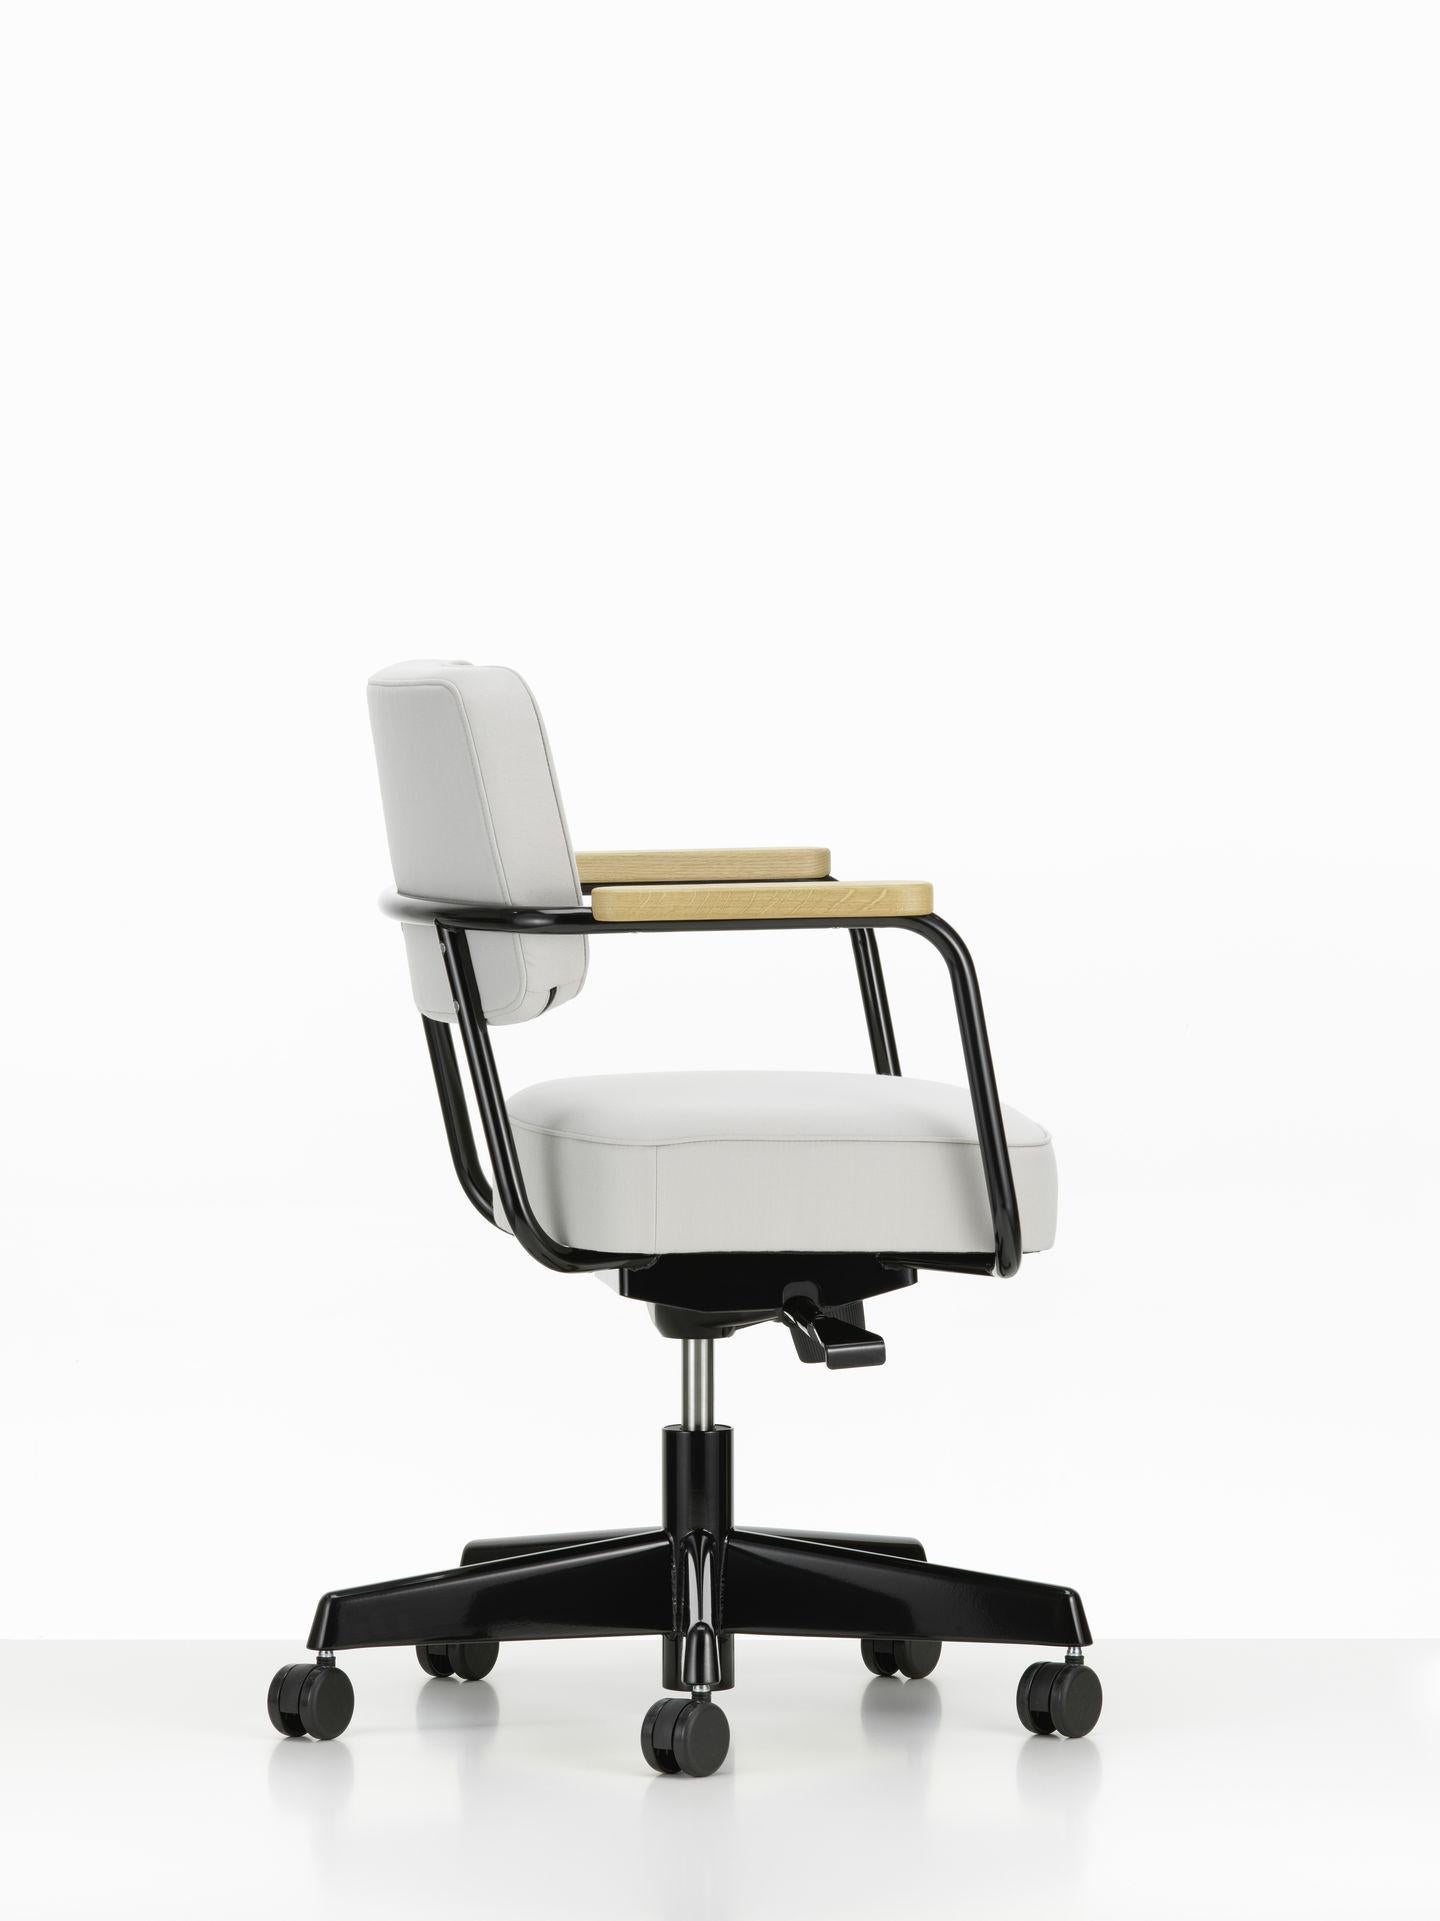 Swiss Jean Prouvé Fauteuil Direction Pivotant Office Chair by Vitra